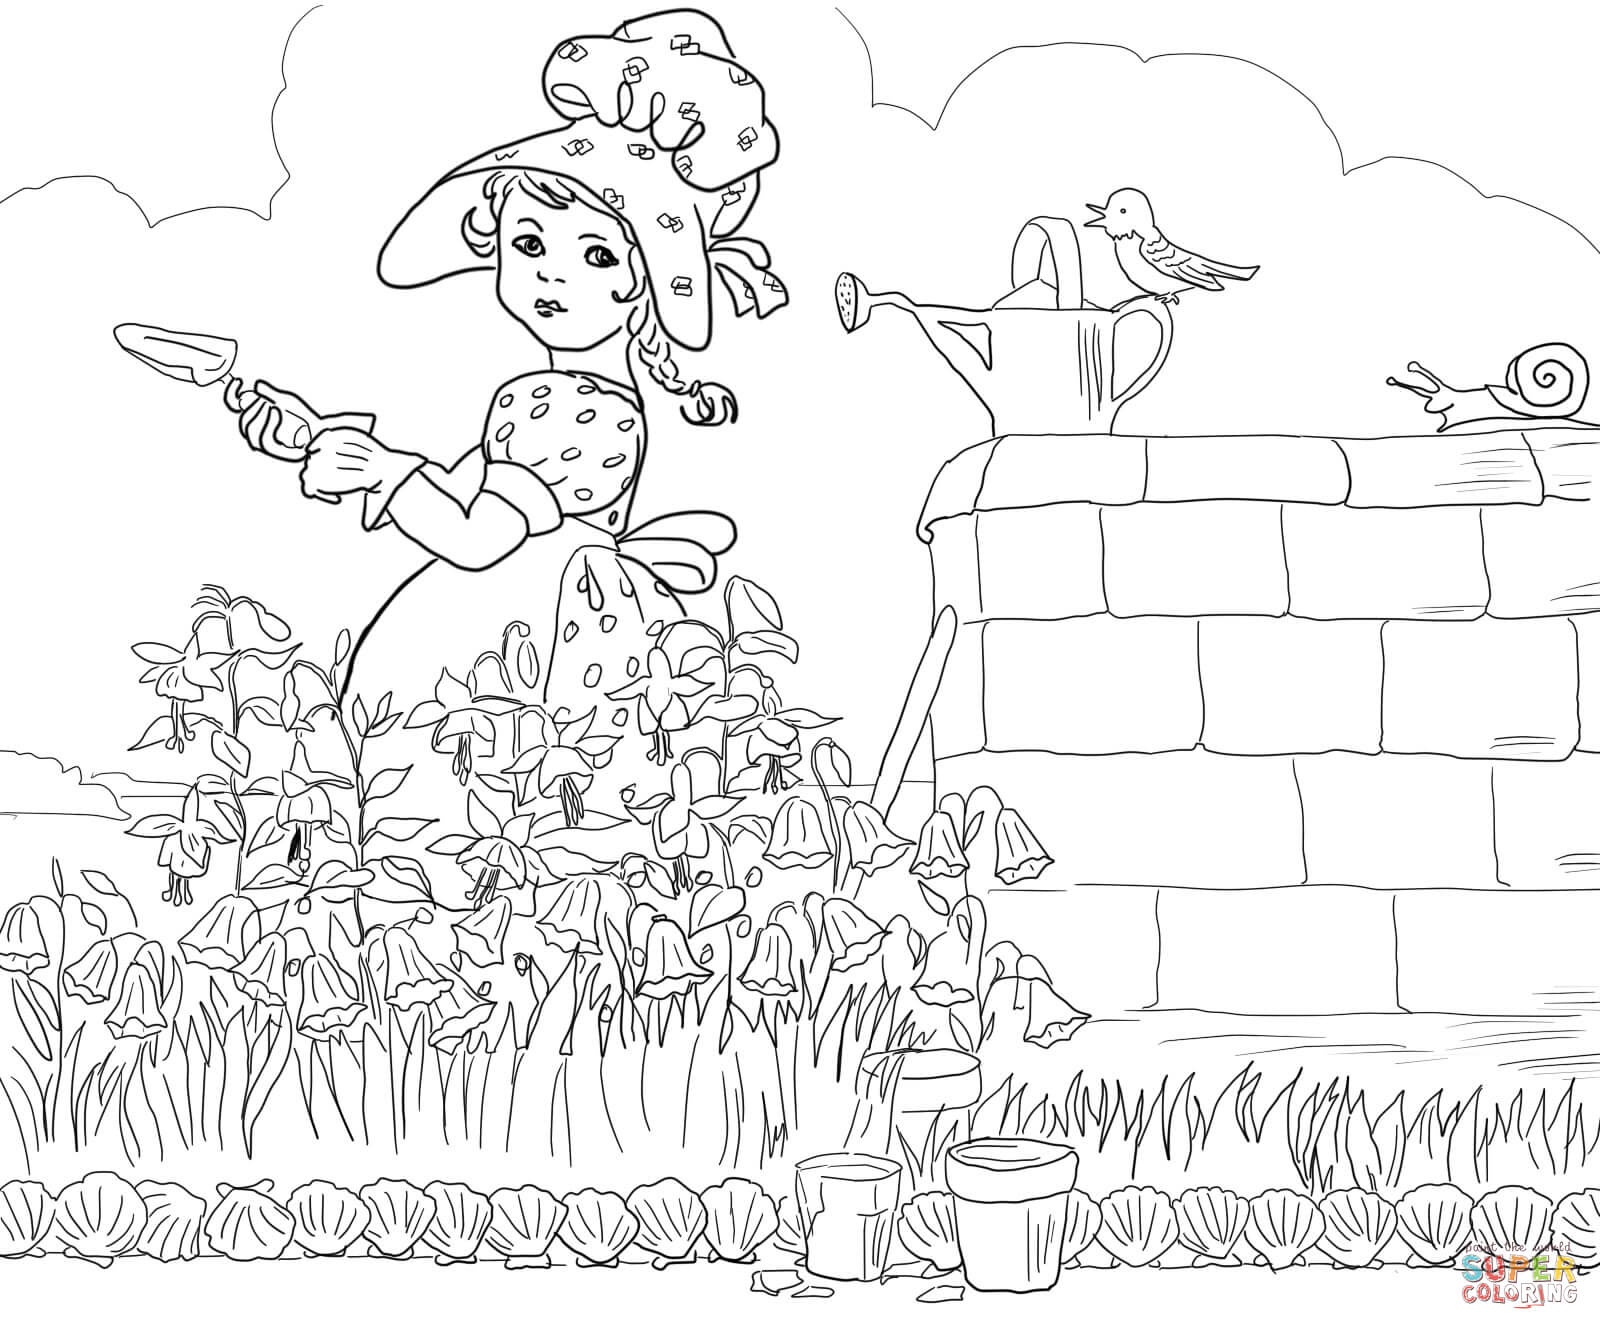 Mary Mary Quite Contrary Nursery Rhyme Coloring Page | Free - Free Printable Nursery Rhyme Coloring Pages